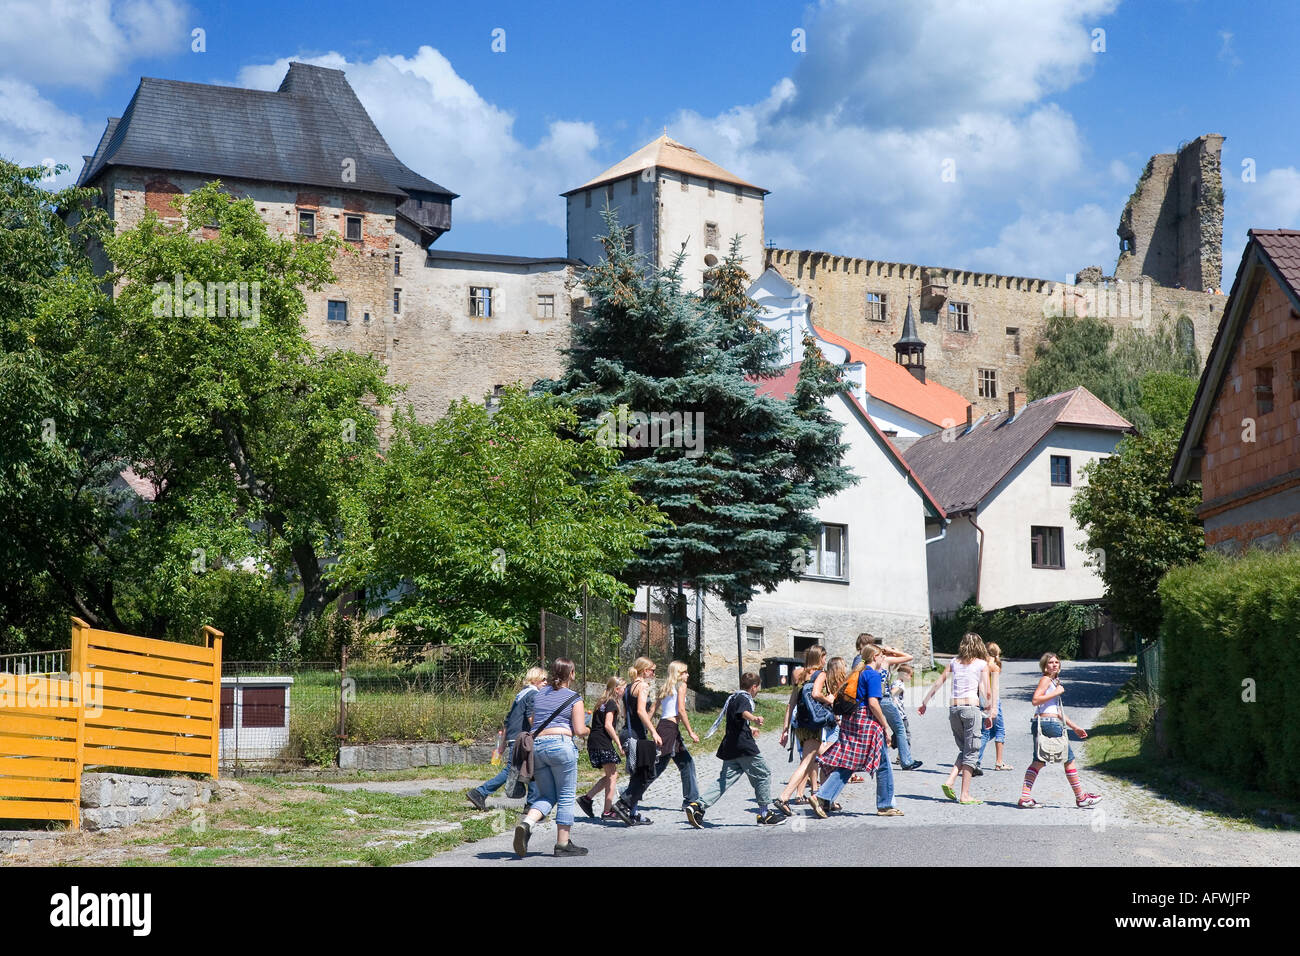 Page 2 - Jaroslav Hasek High Resolution Stock Photography and Images - Alamy